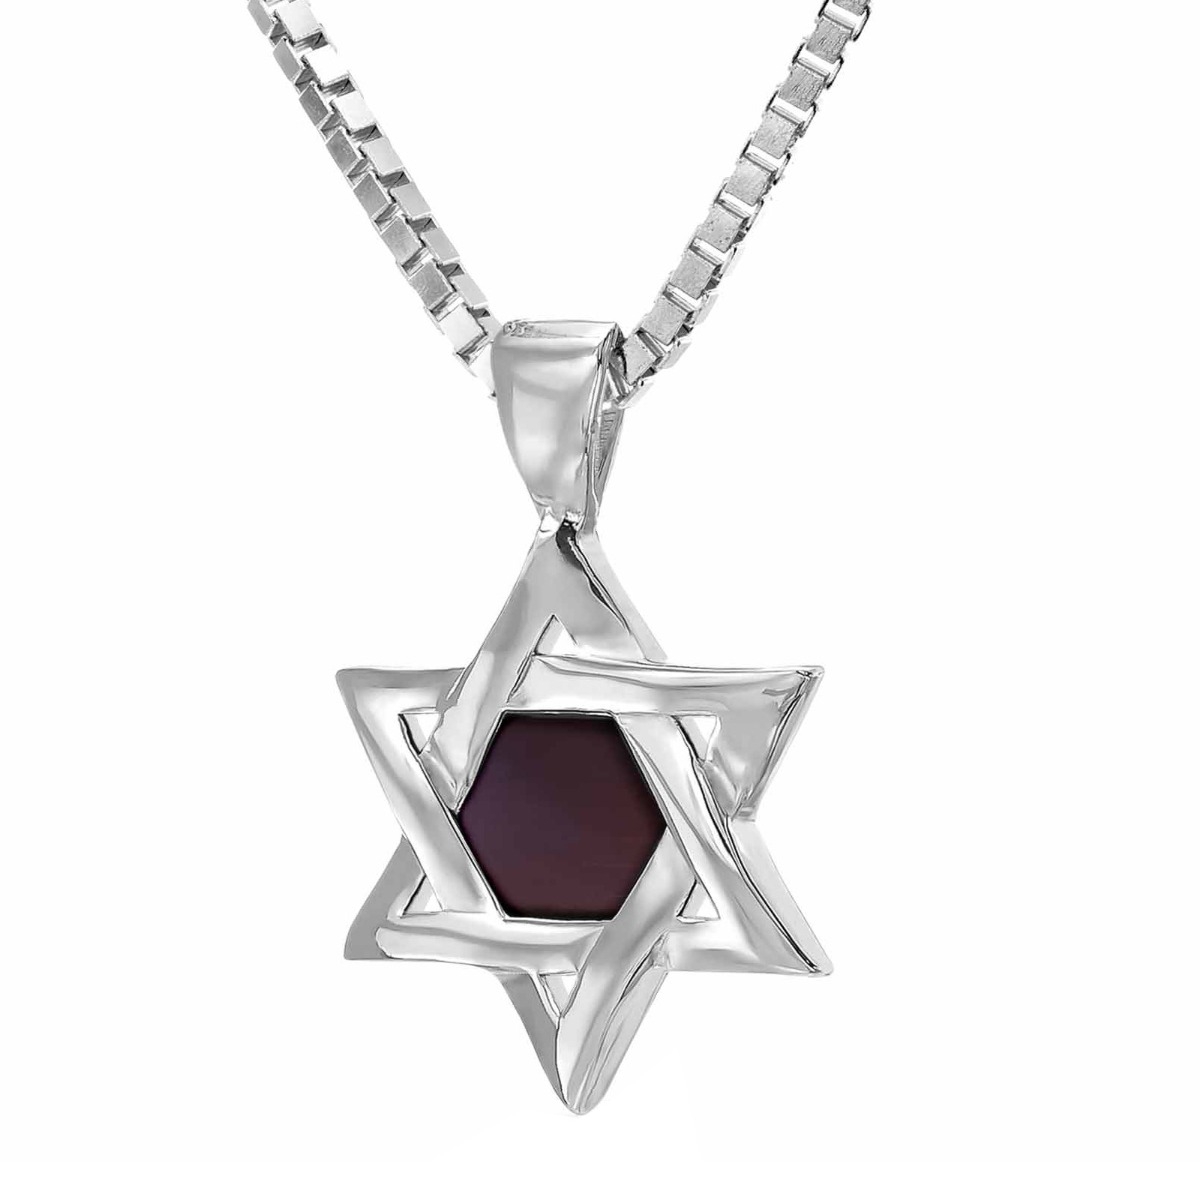 Star of David Necklace with Micro-Inscribed Bible Chip - Silver or 14K Gold - 1